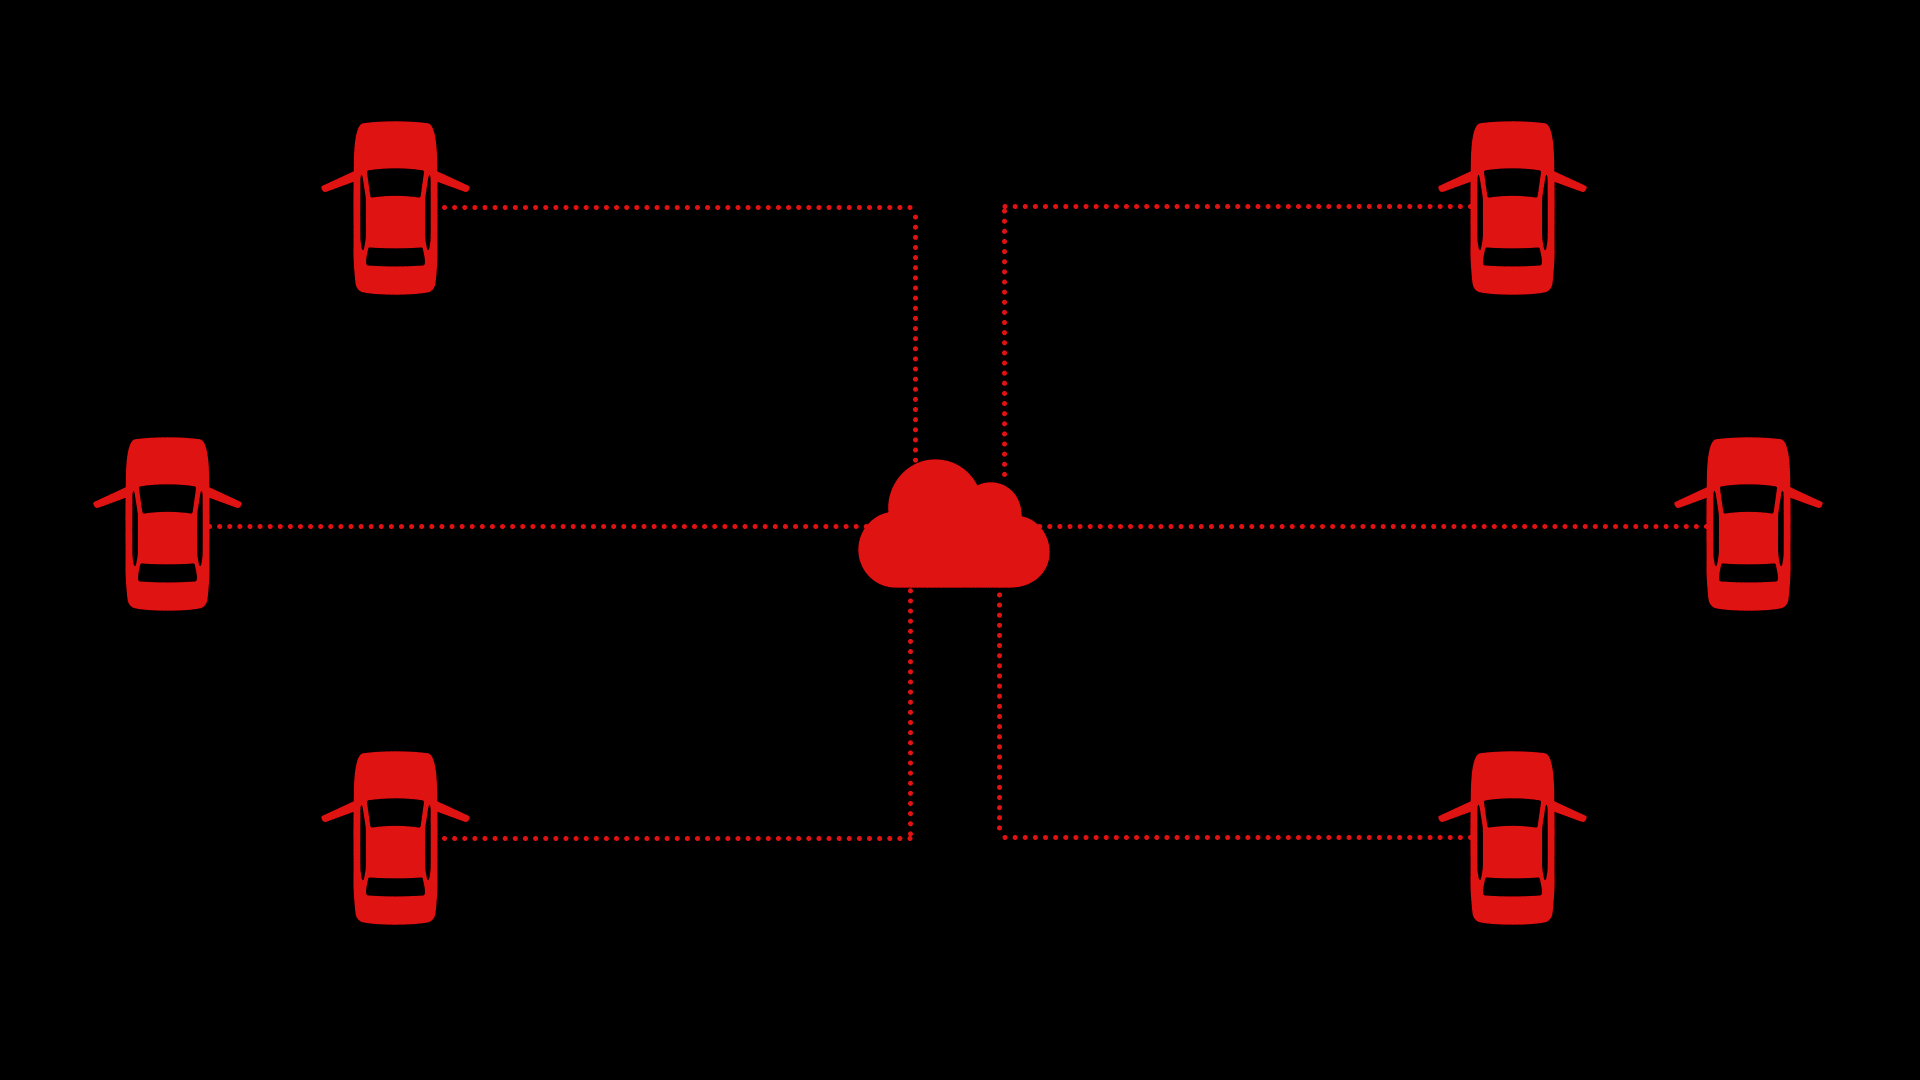 a cloud connected by dotted lines to six blinking "open car door" warning symbols